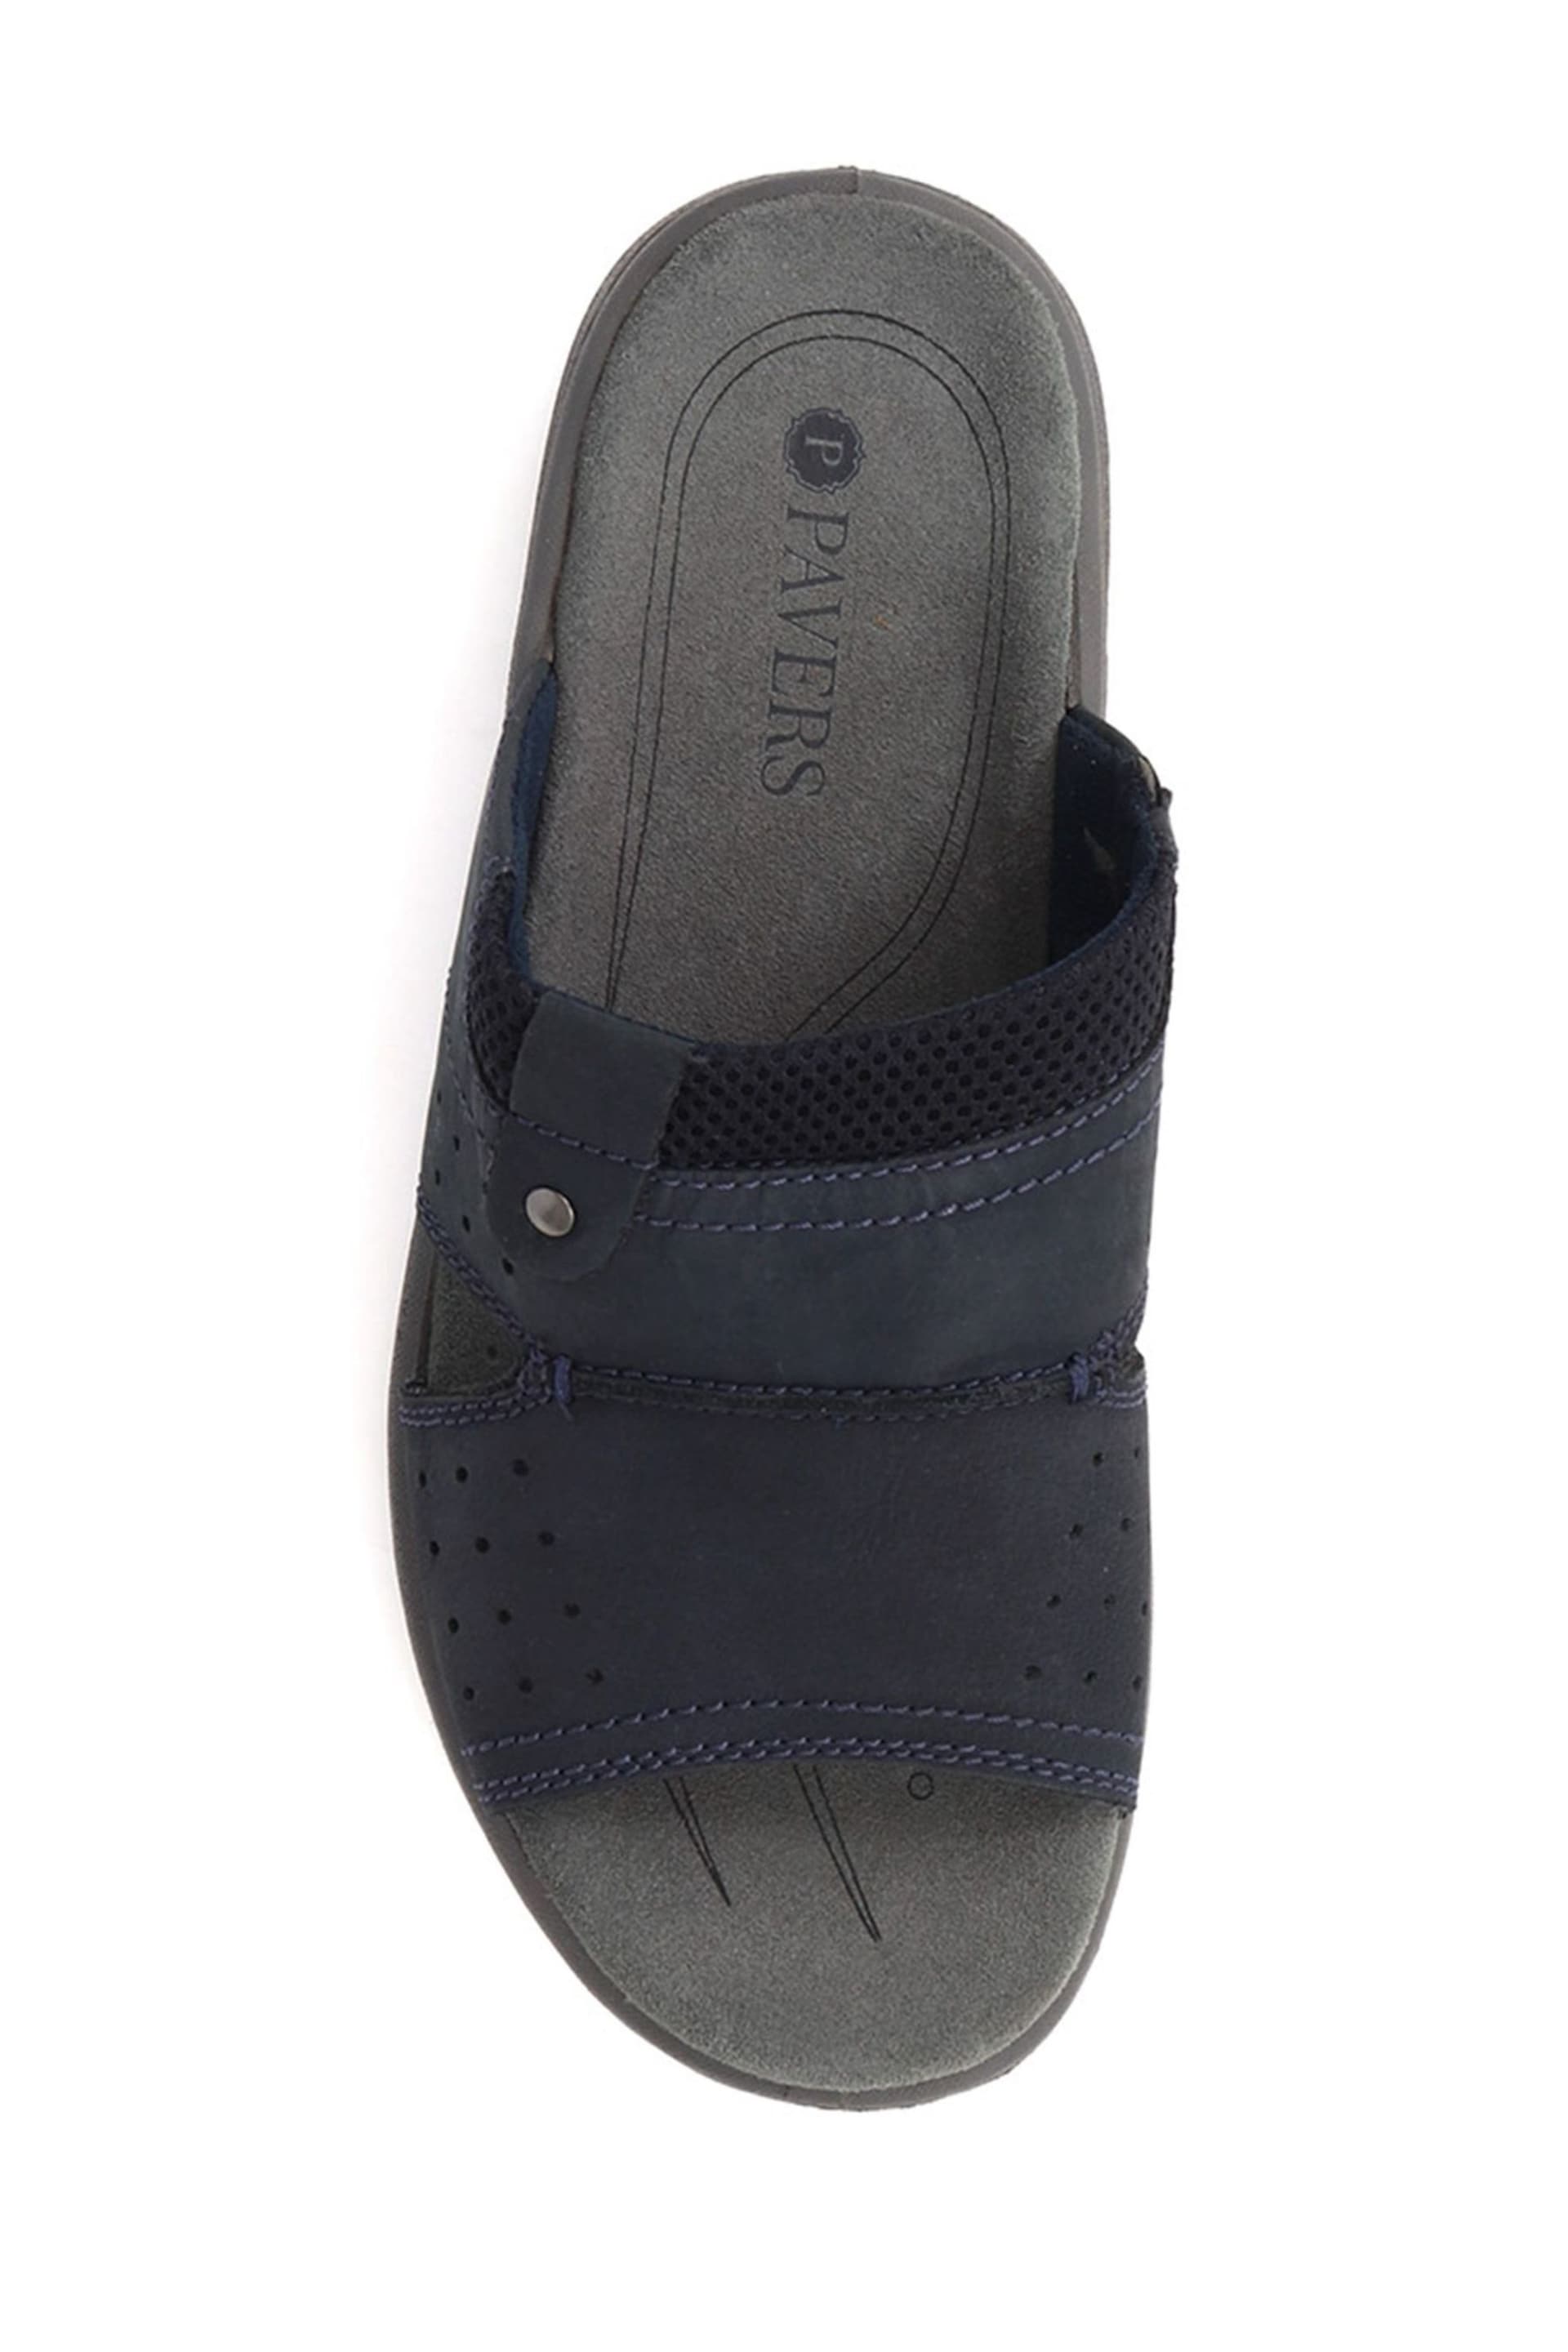 Pavers Blue Leather Mule Sandals - Image 3 of 5